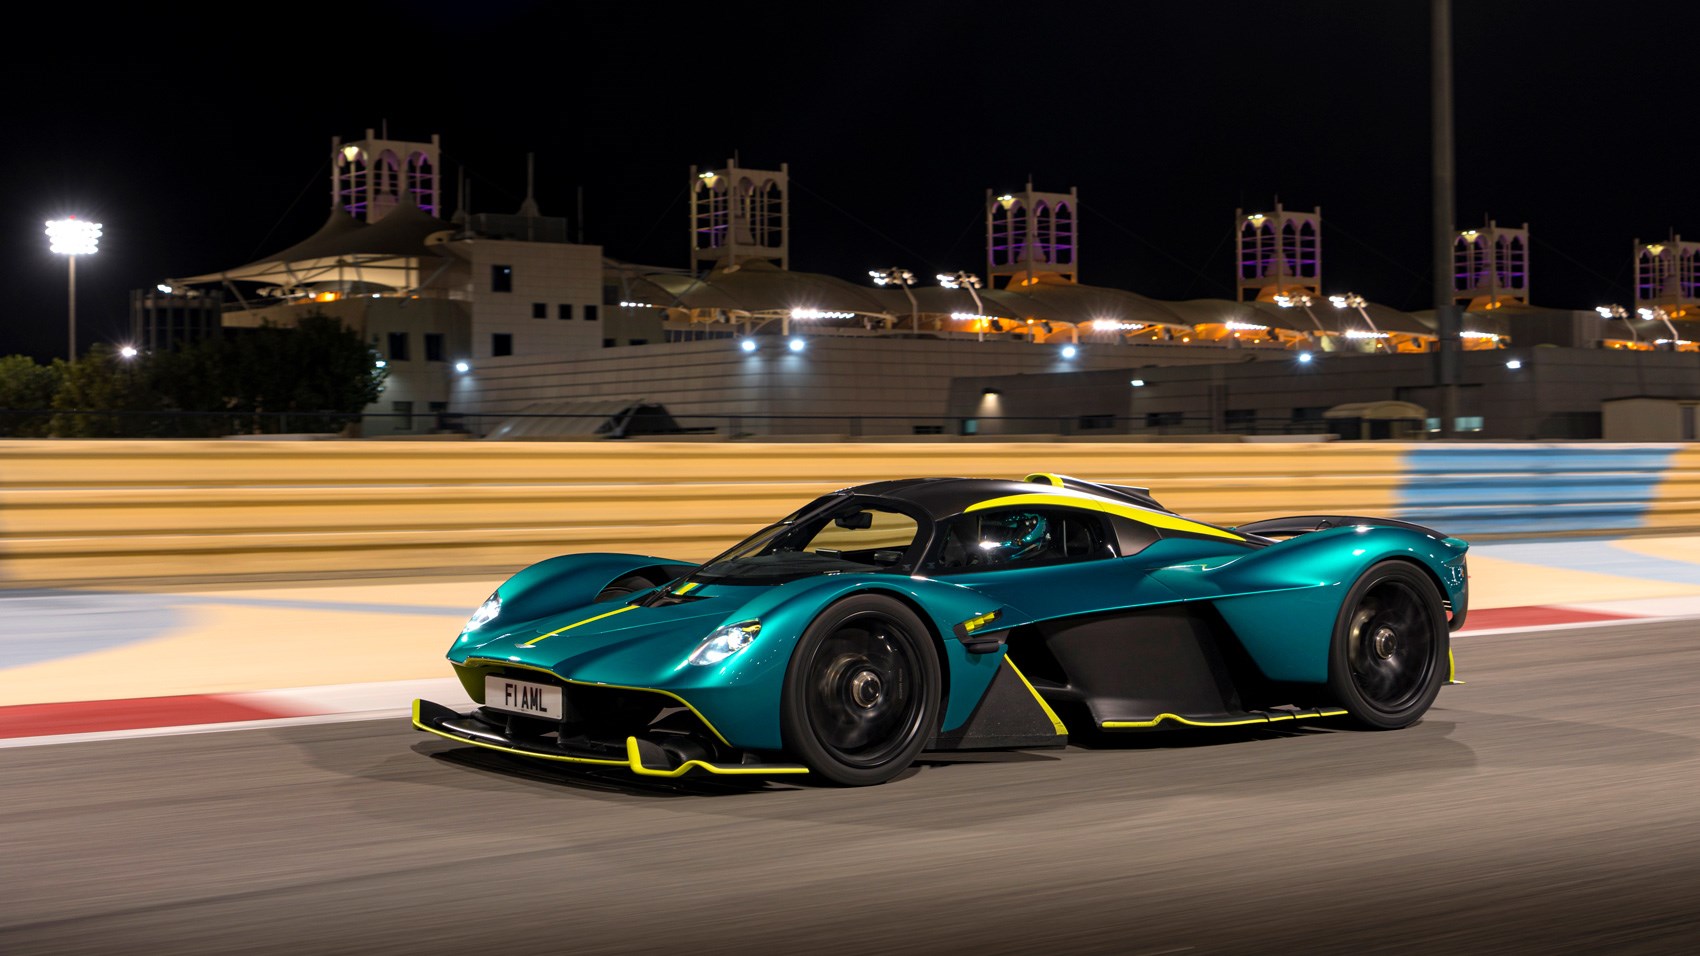 Aston Martin Valkyrie Reviews/Lap Time by Sport Auto - IRL Cars